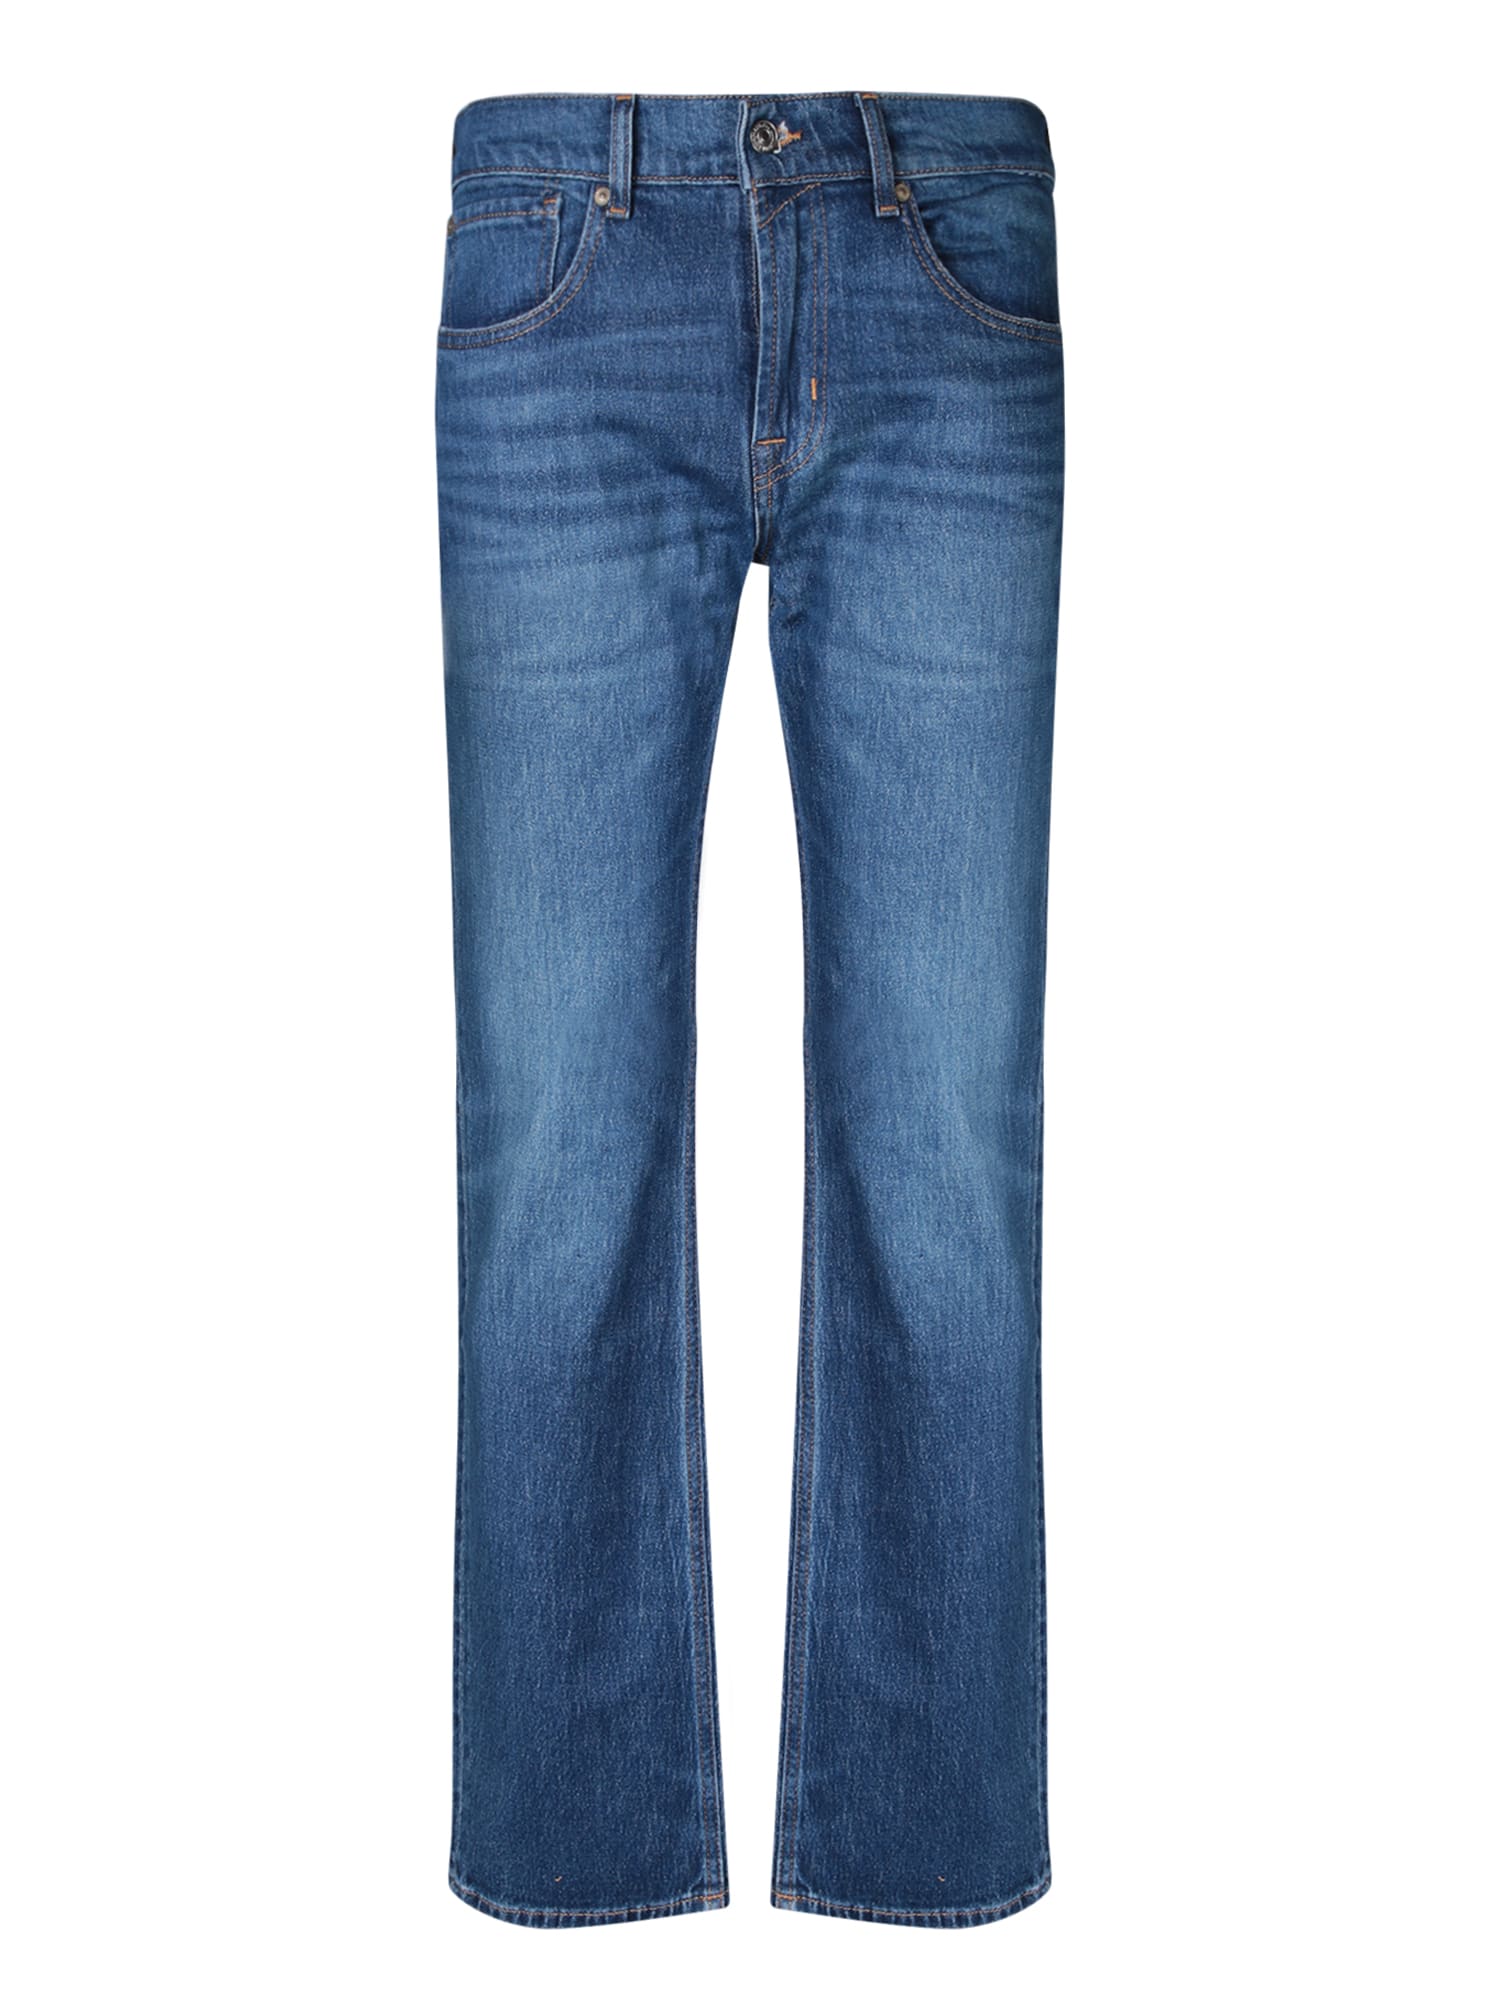 Shop 7 For All Mankind The Straight Exchange Blue Jeans